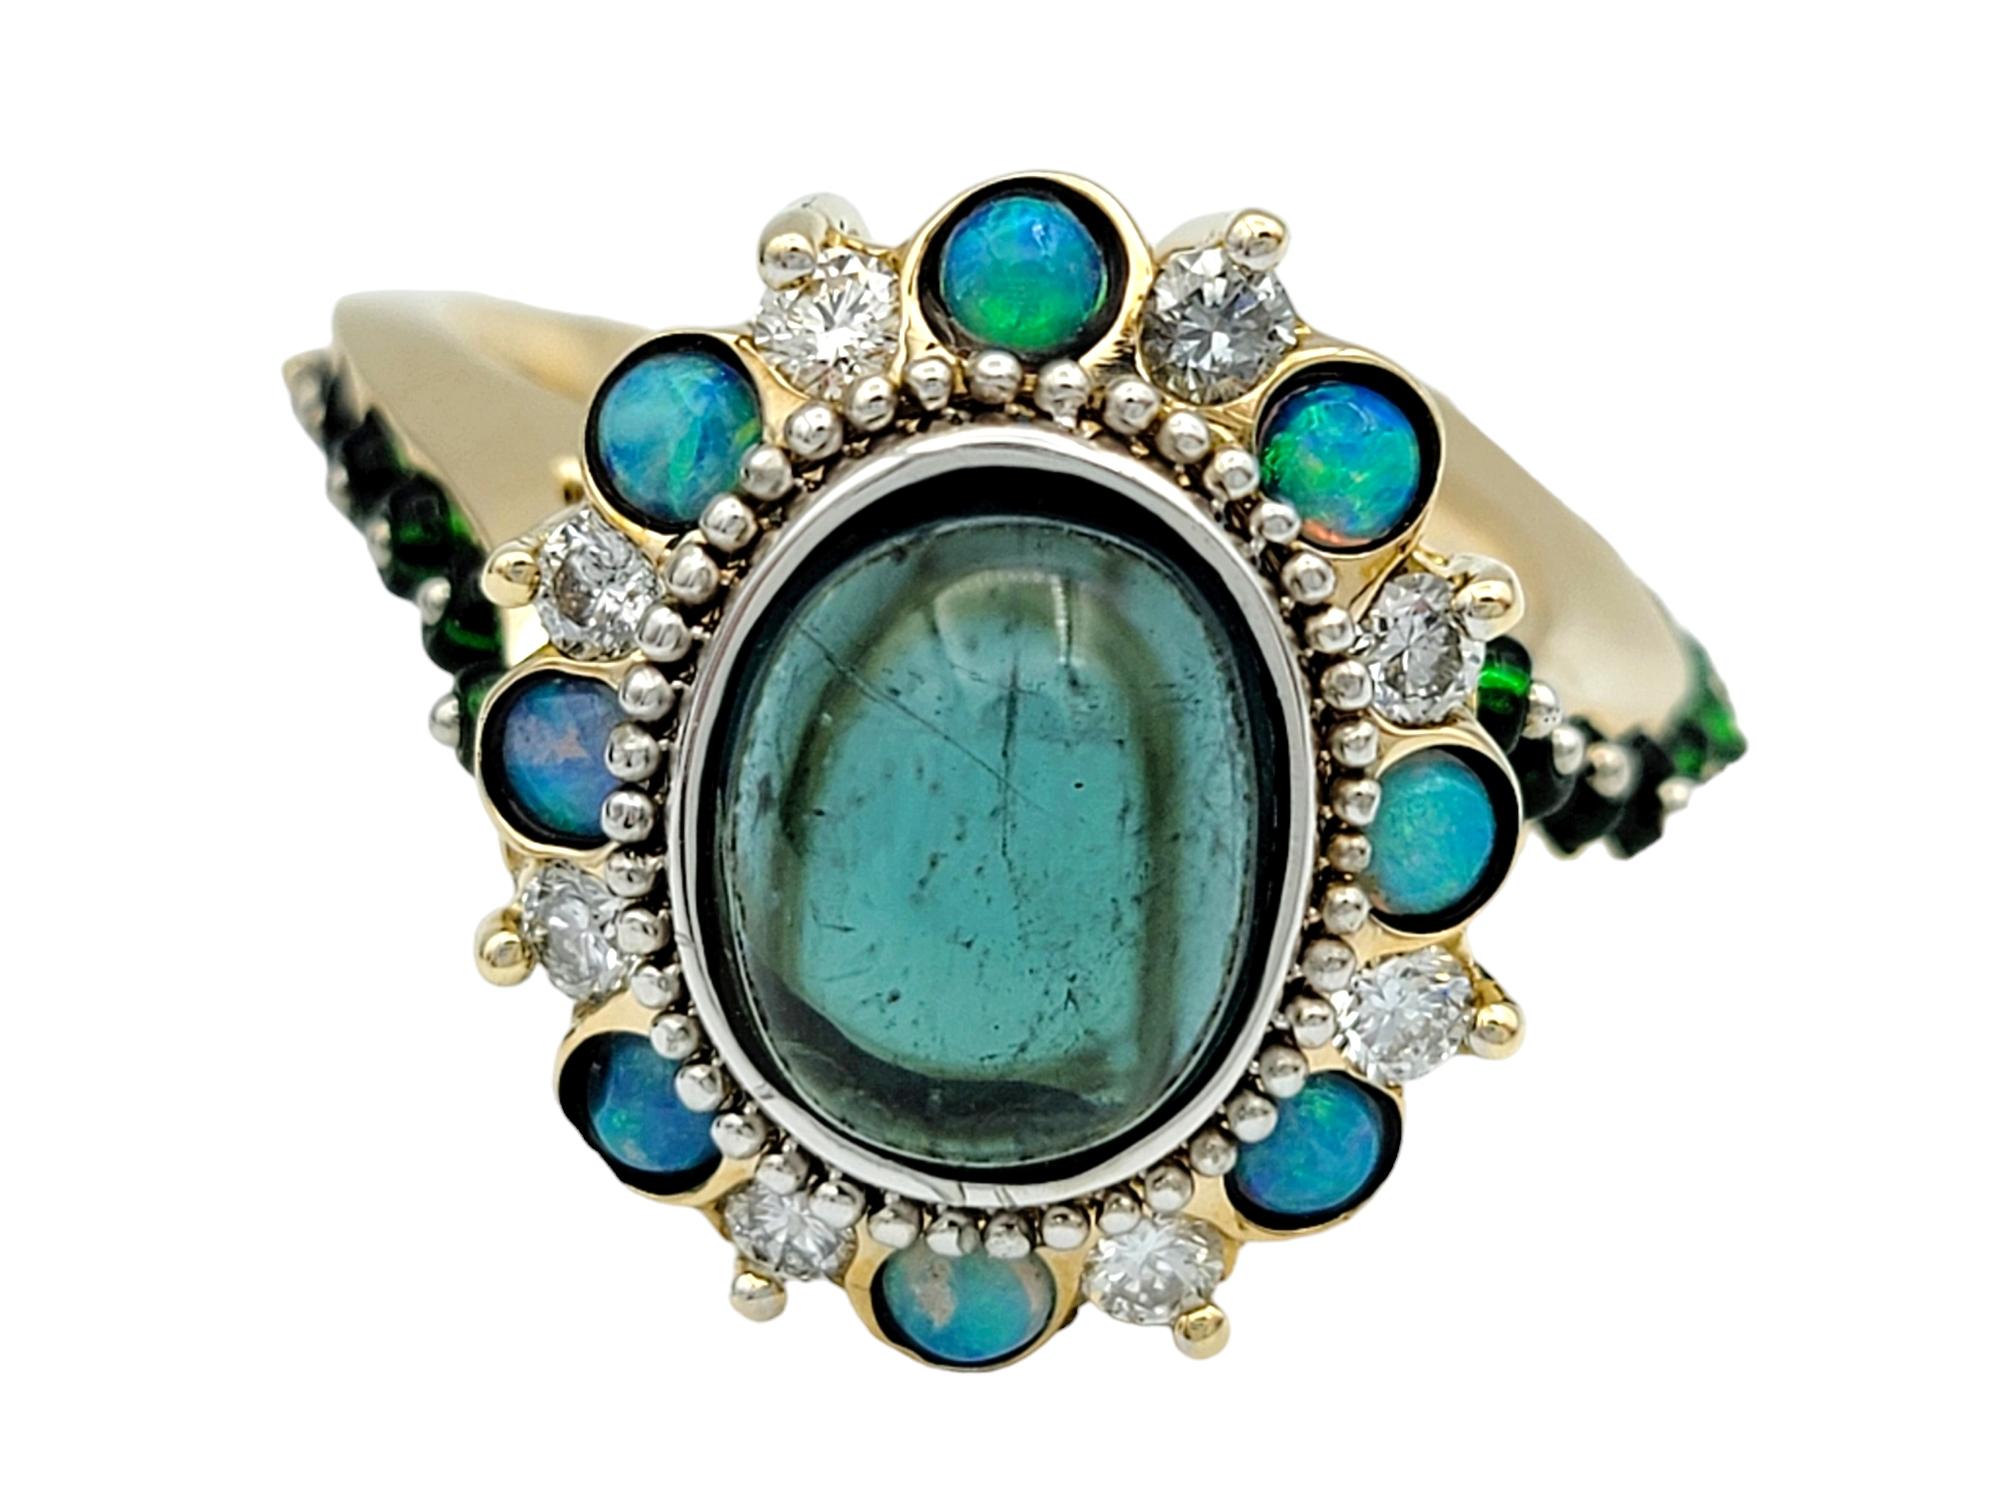 Ring Size: 7.75

This stunning multi-stone ring set in 14 karat yellow gold is a breathtaking piece that showcases a harmonious blend of colors and gemstones. At its heart sits a mesmerizing oval cabochon indicolite tourmaline, radiating a deep and